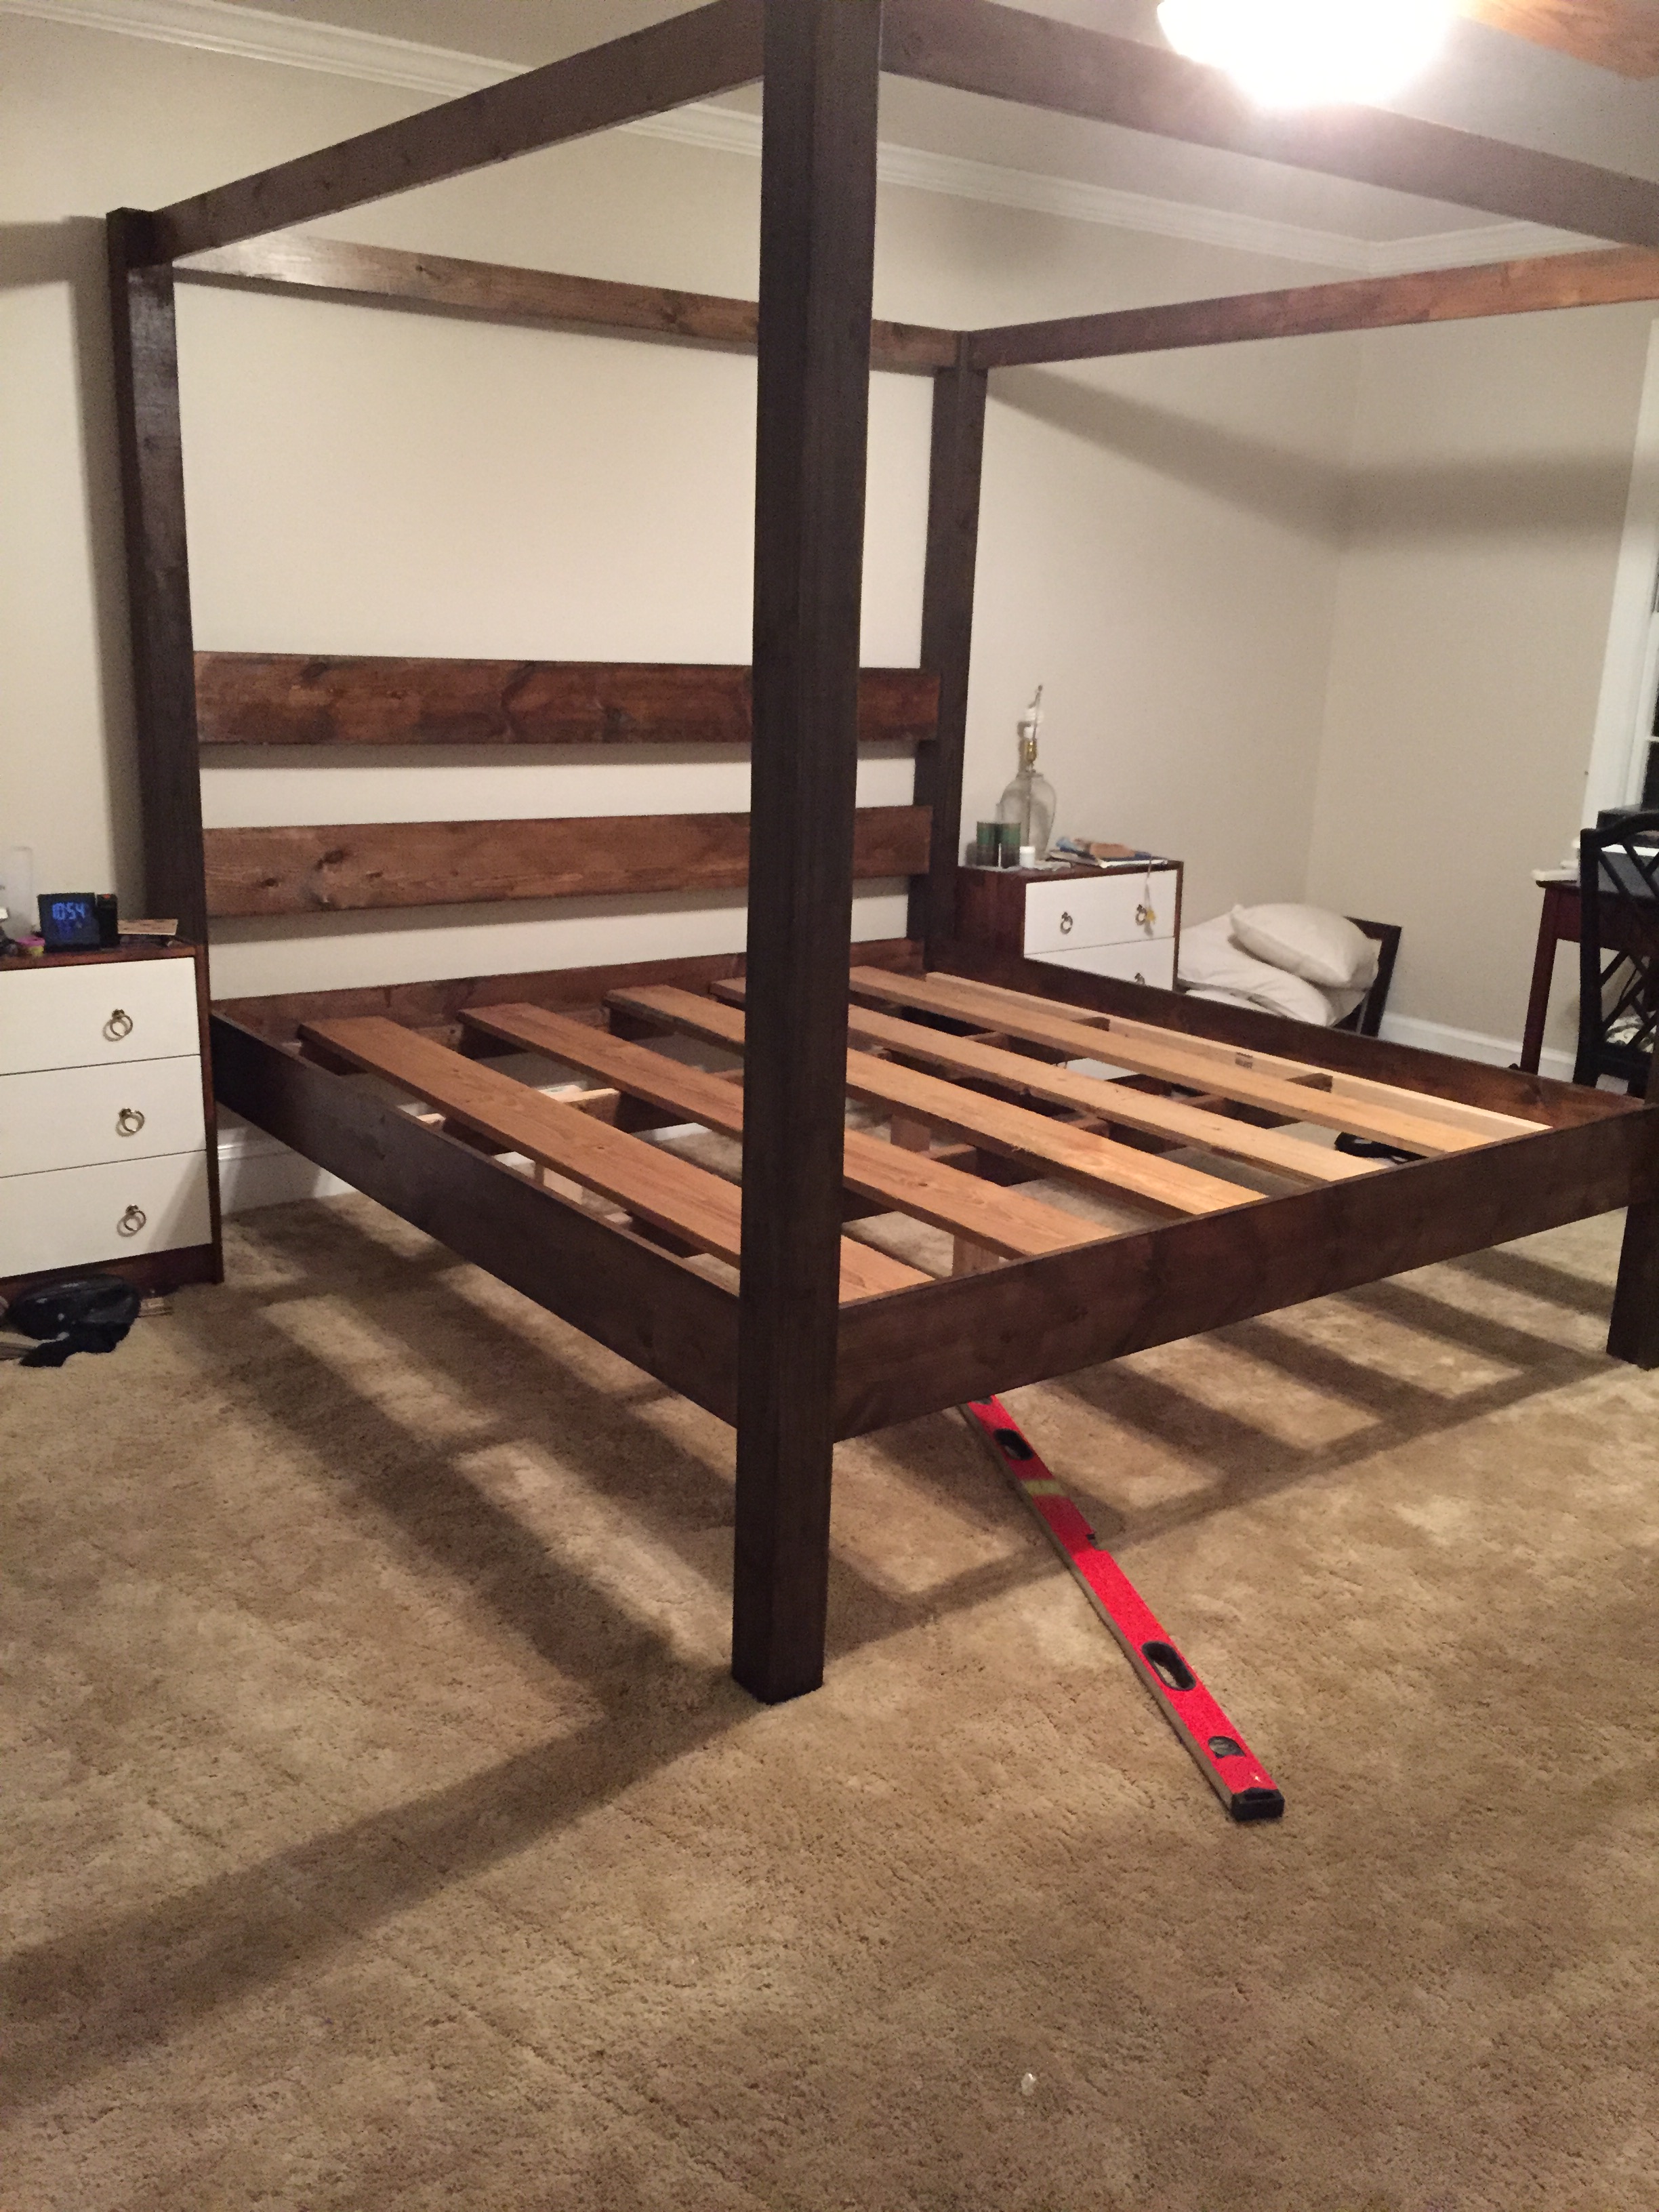 Diy Canopy Bed Frame Full : How to Build a DIY Canopy Bed Frame